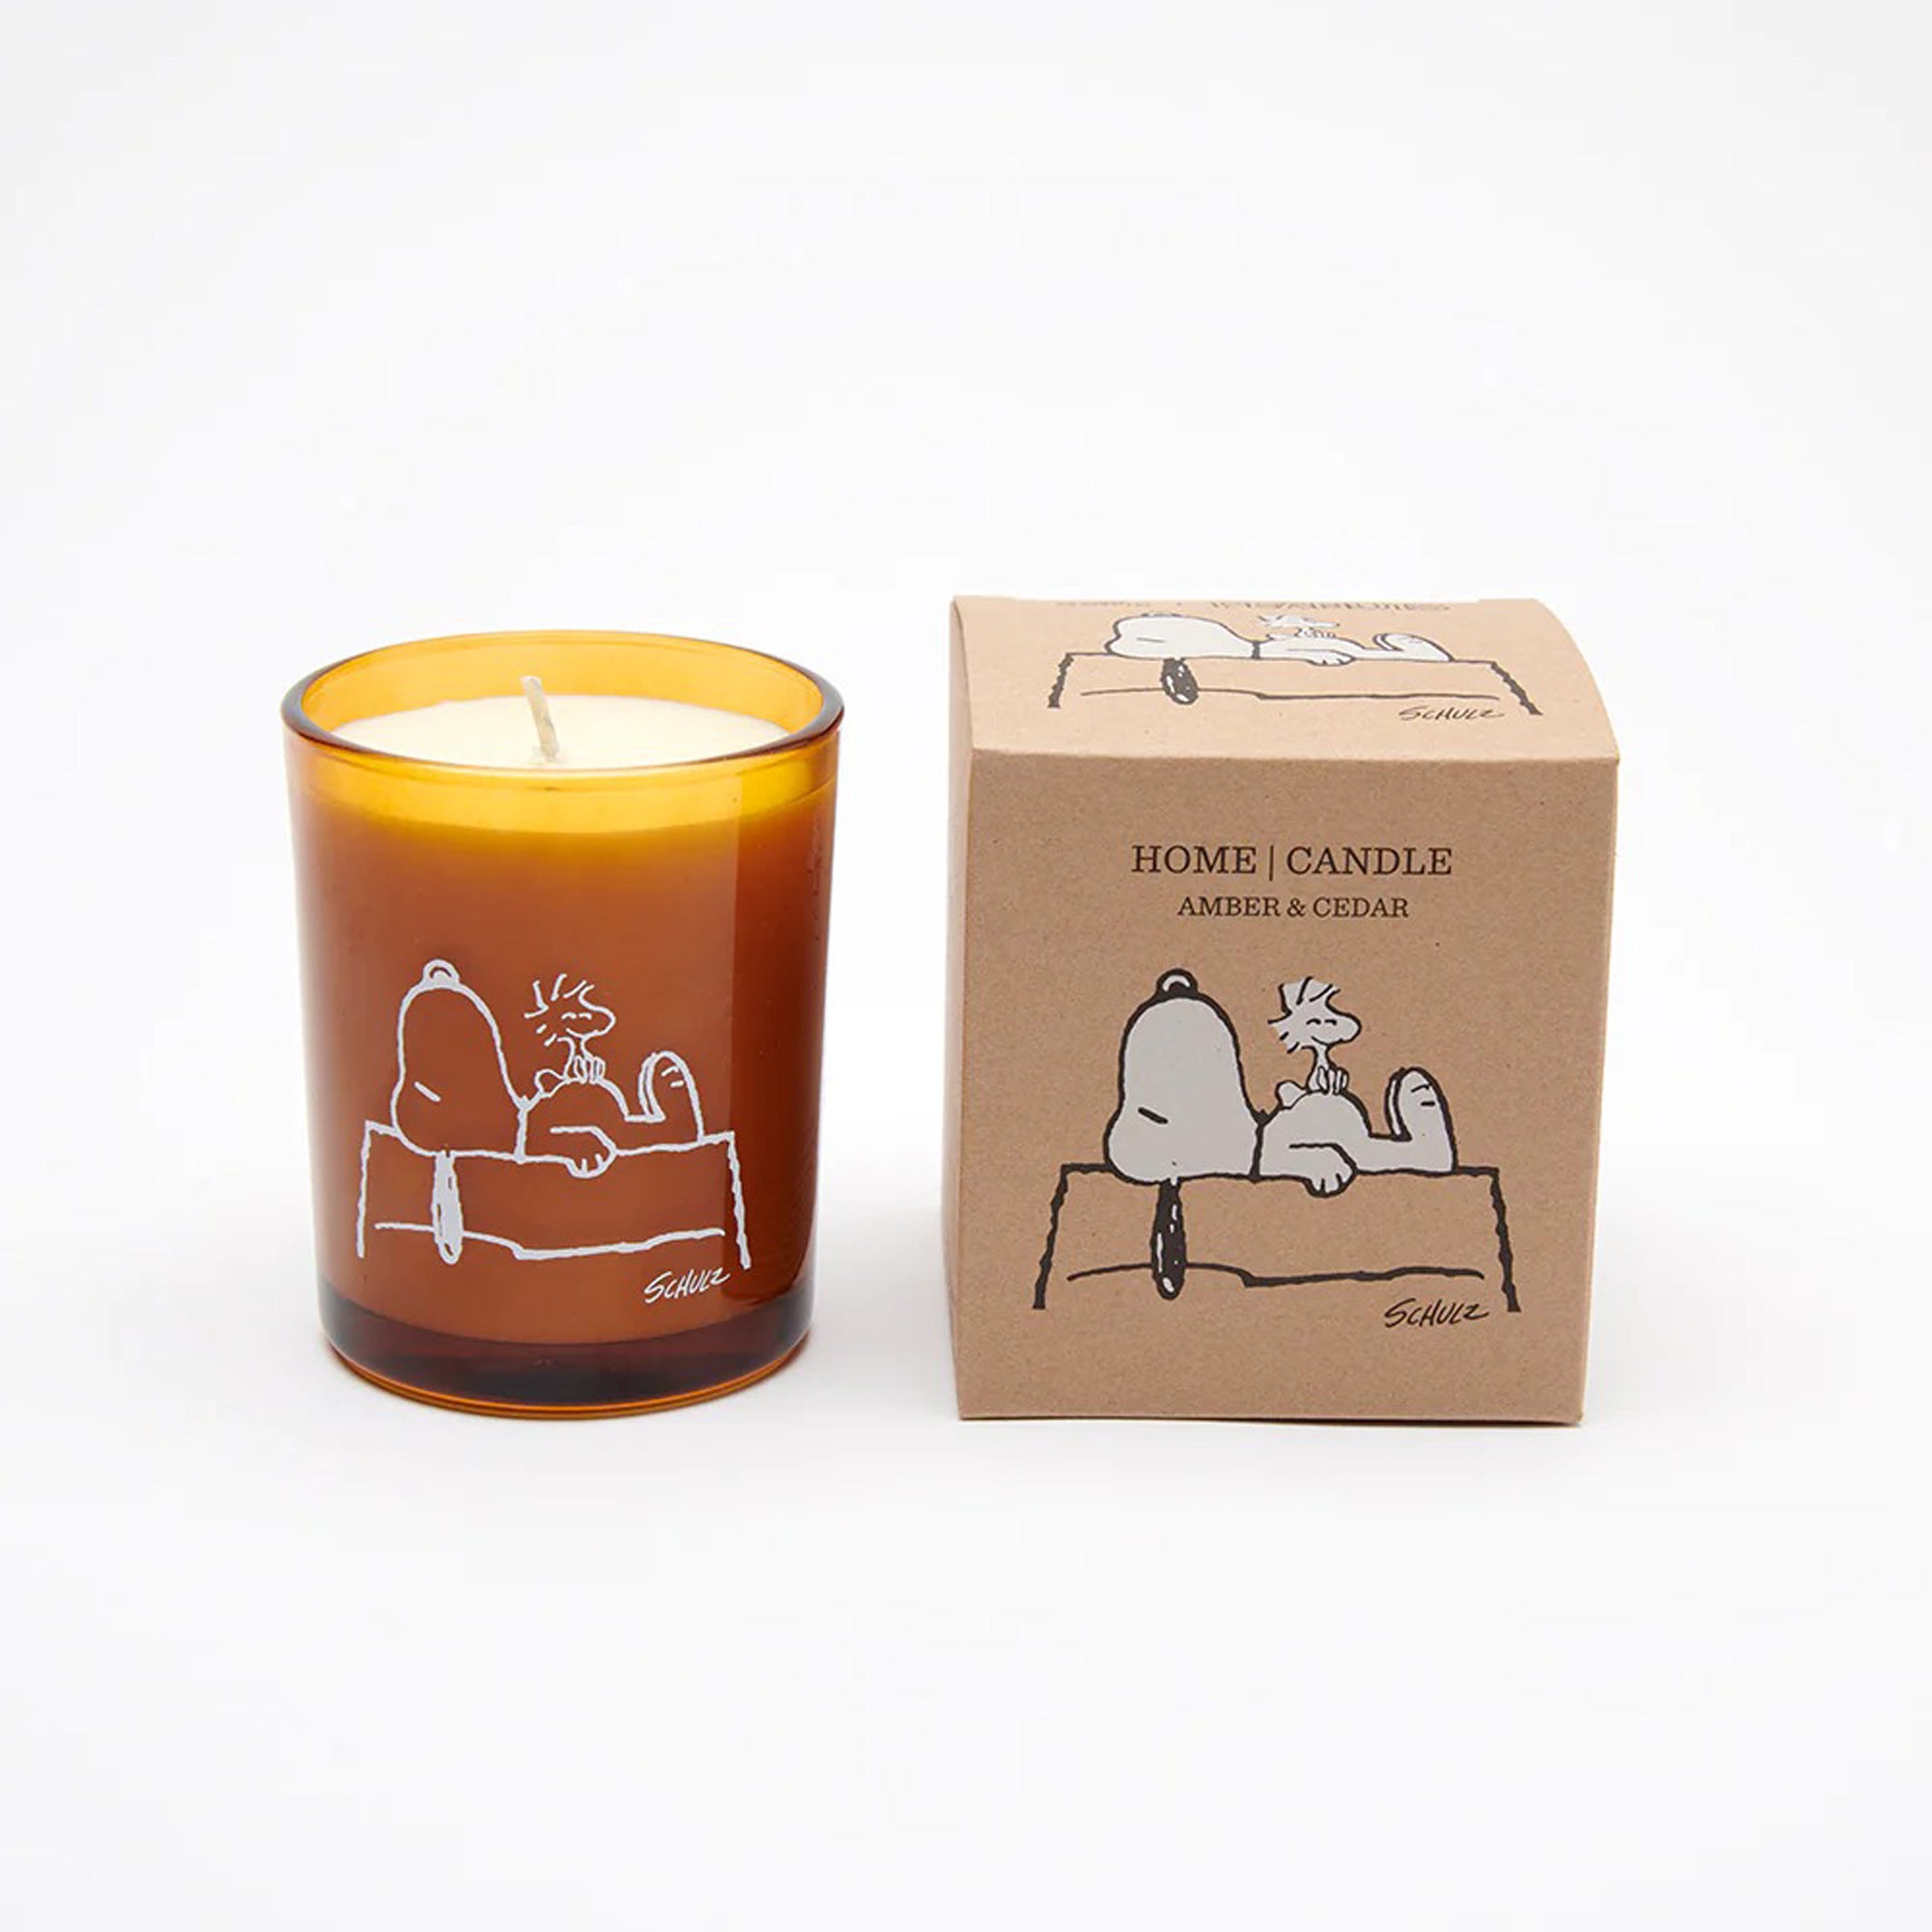 PEANUTS - HOME CANDLE | Vegan, Vegetable WAX CANDLE | Amber & Cedar | Magpie